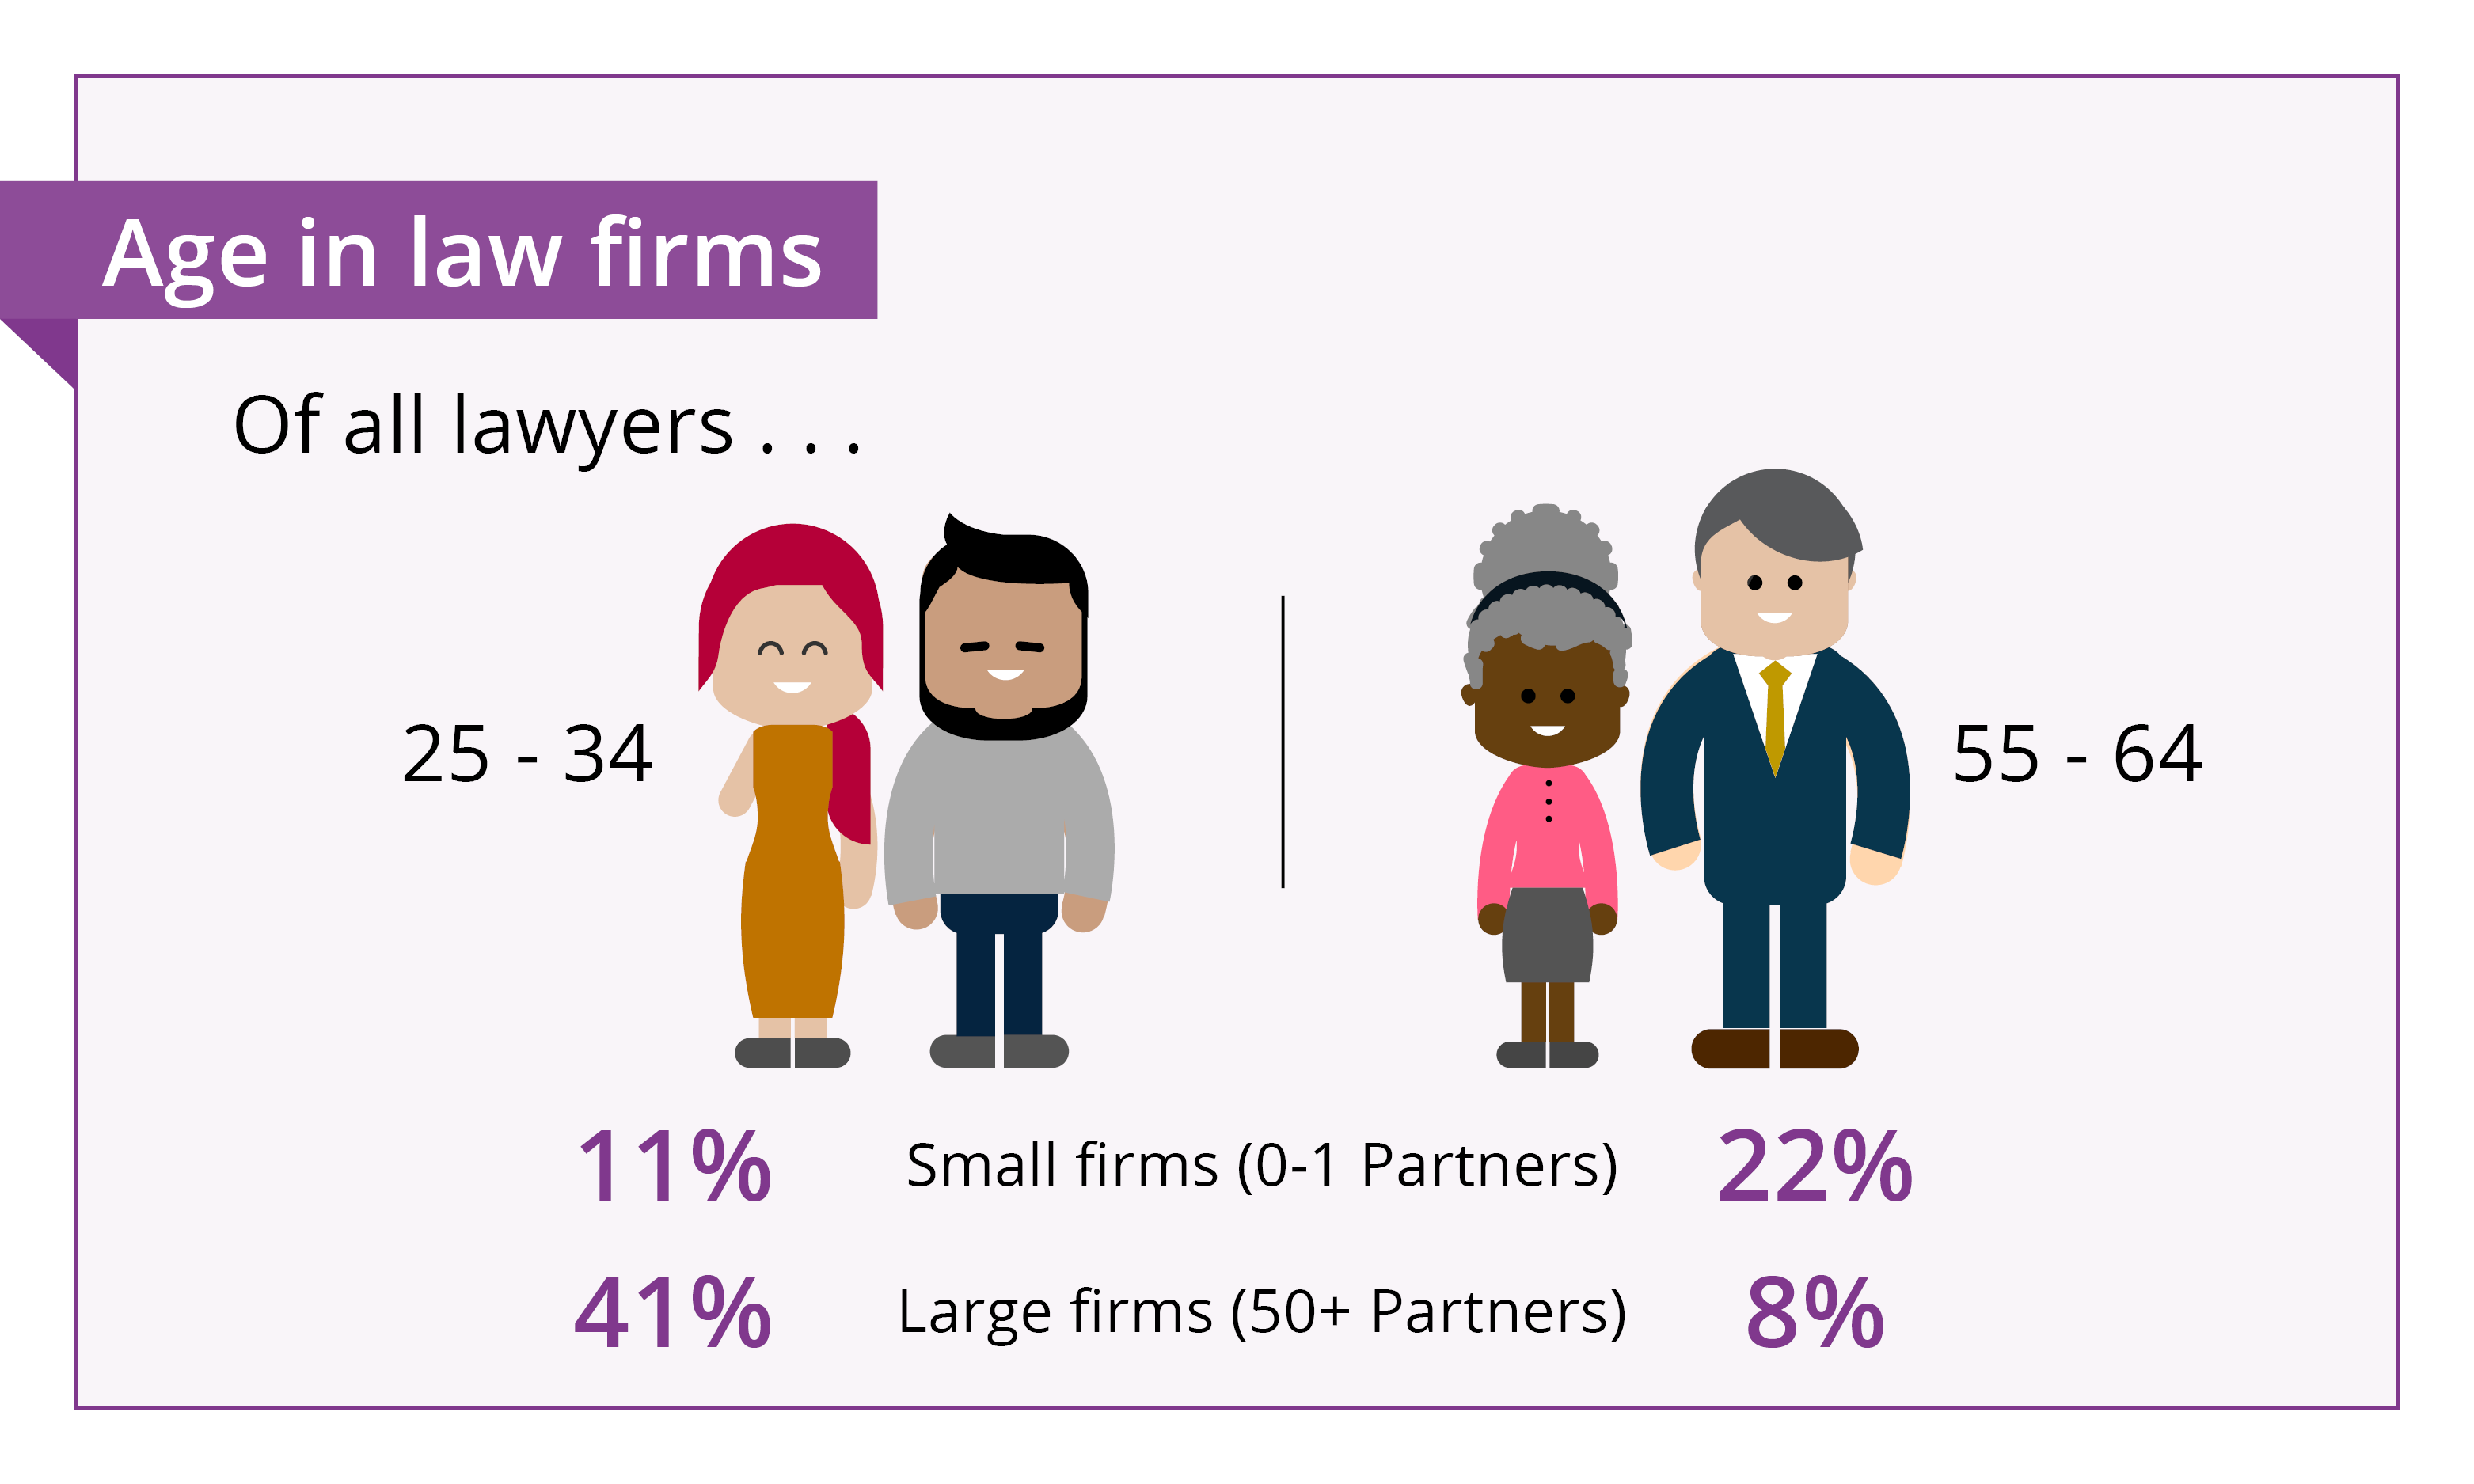 Of all lawyes 25-34 11% small firms 41% Large firms and 55-64 22% small firm and 8% large firms